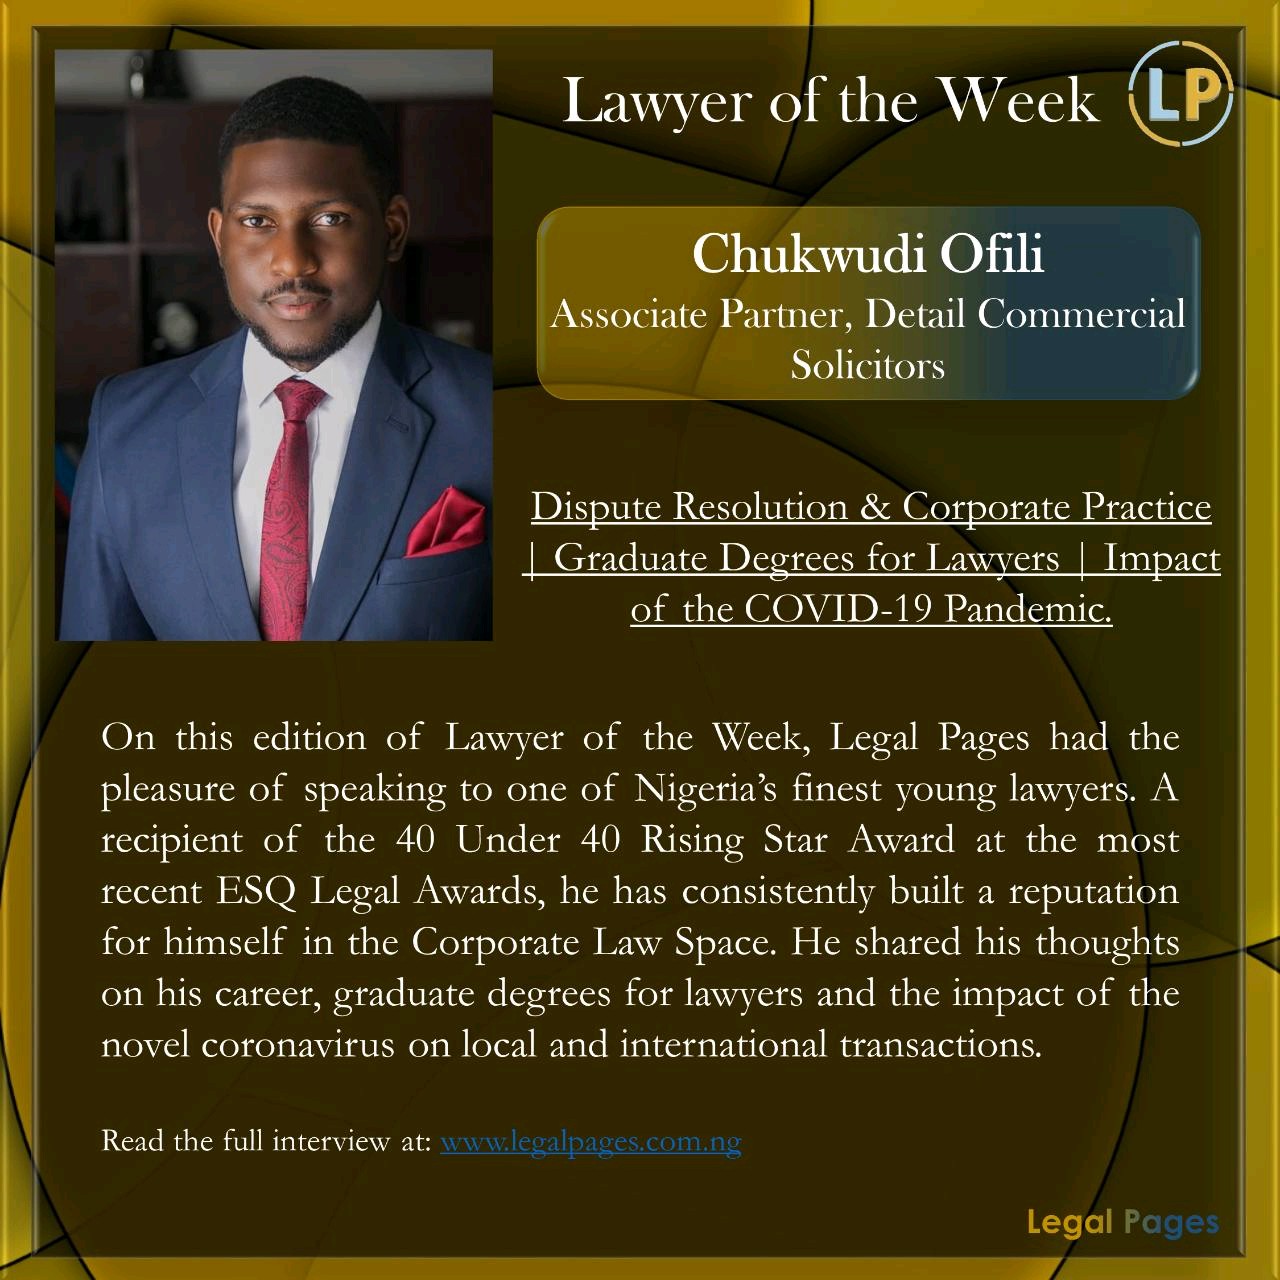 Chukwudi Ofili, Associate Partner, Detail is the Legal Pages’ Lawyer of the week.